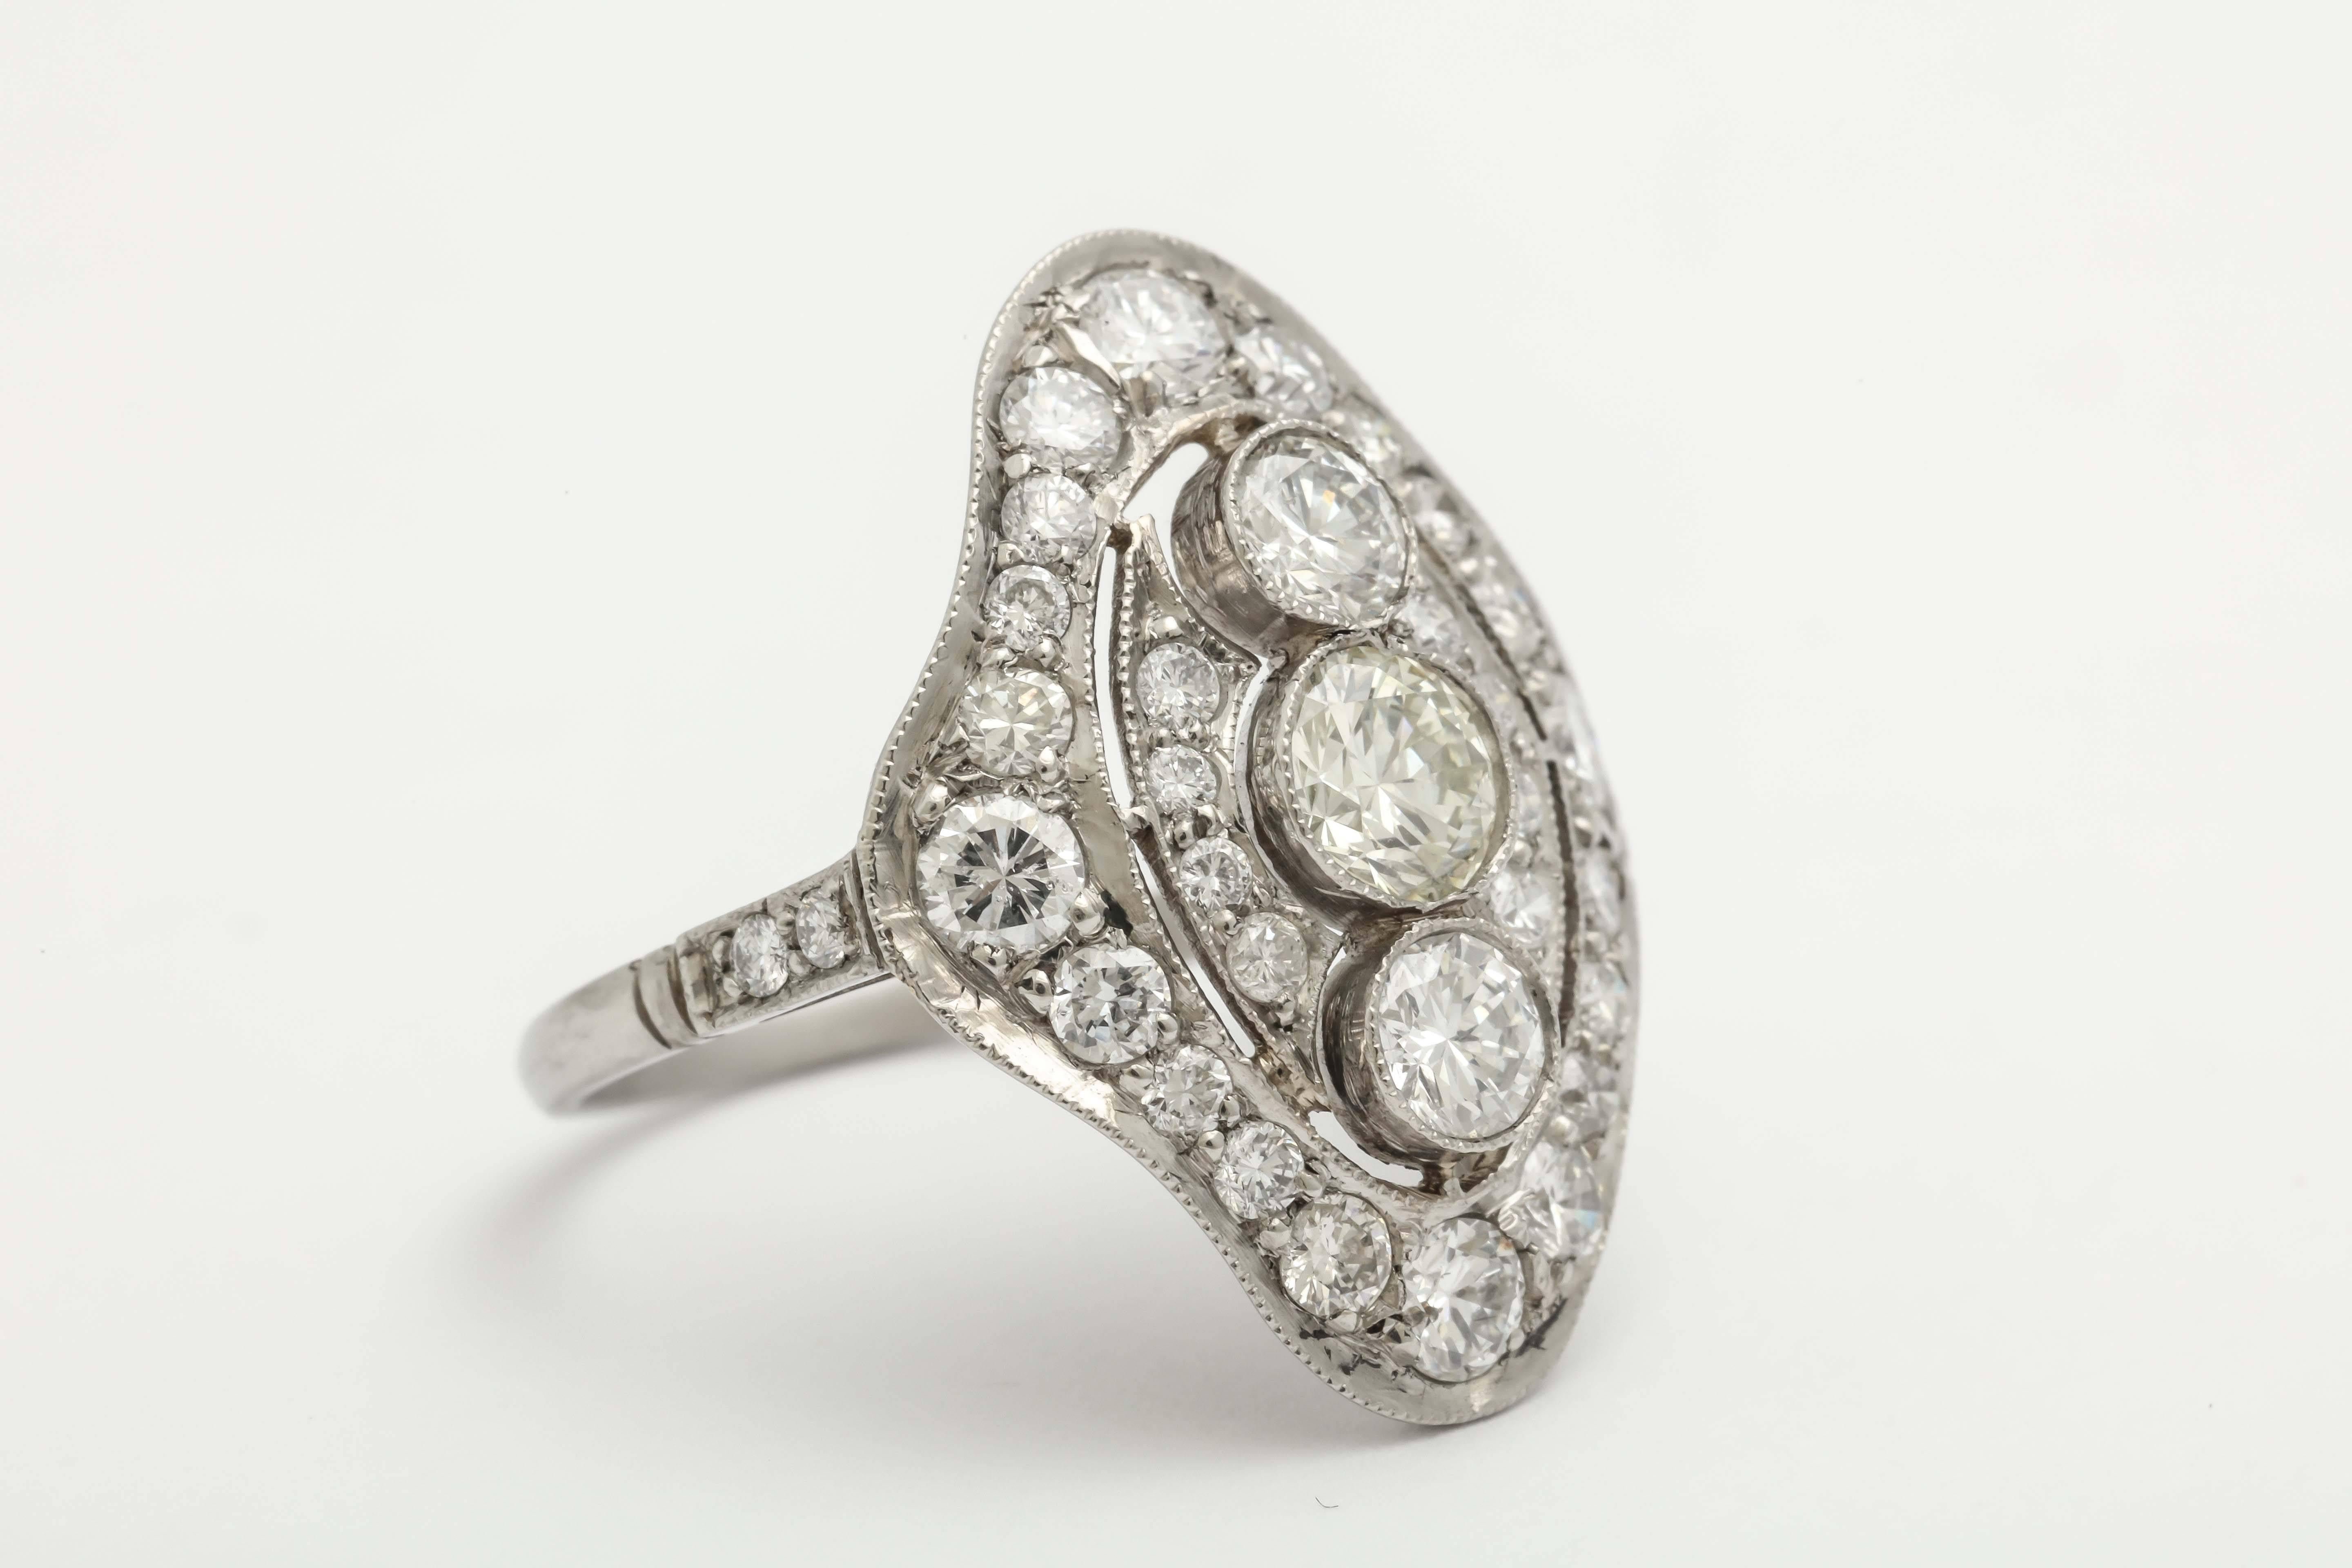 One Platinum & Diamond Cocktail Oblong Shaped Dinner Ring Centering [3] Vertical Bezel Set Diamonds Weighing Approximately .75 cts Total Weight And Surrounded By Numerous Antique cut Diamonds weighing Approximately 1.25 Carats. Total Weight Of